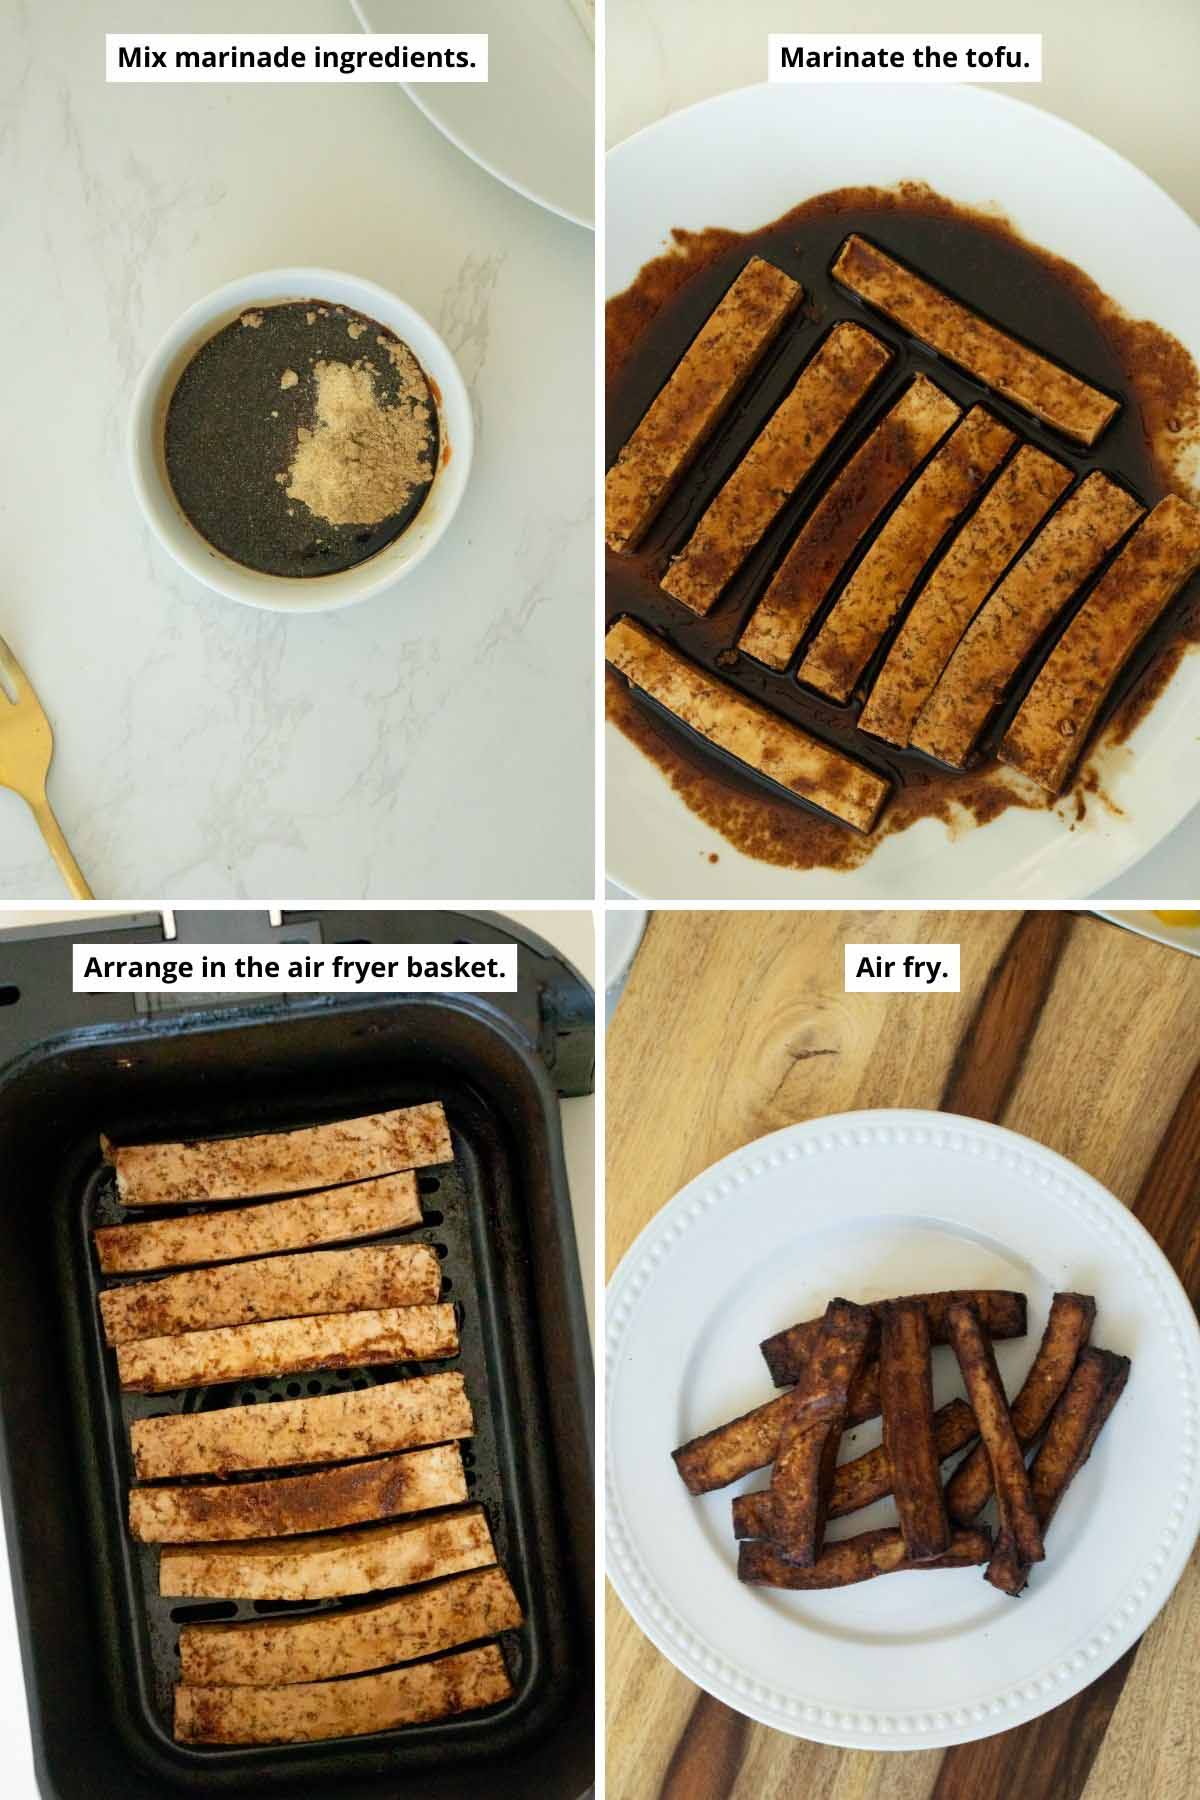 image collage showing the marinade before mixing together, poured over the tofu, the tofu in the air fryer basket, and the tofu on the plate after cooking